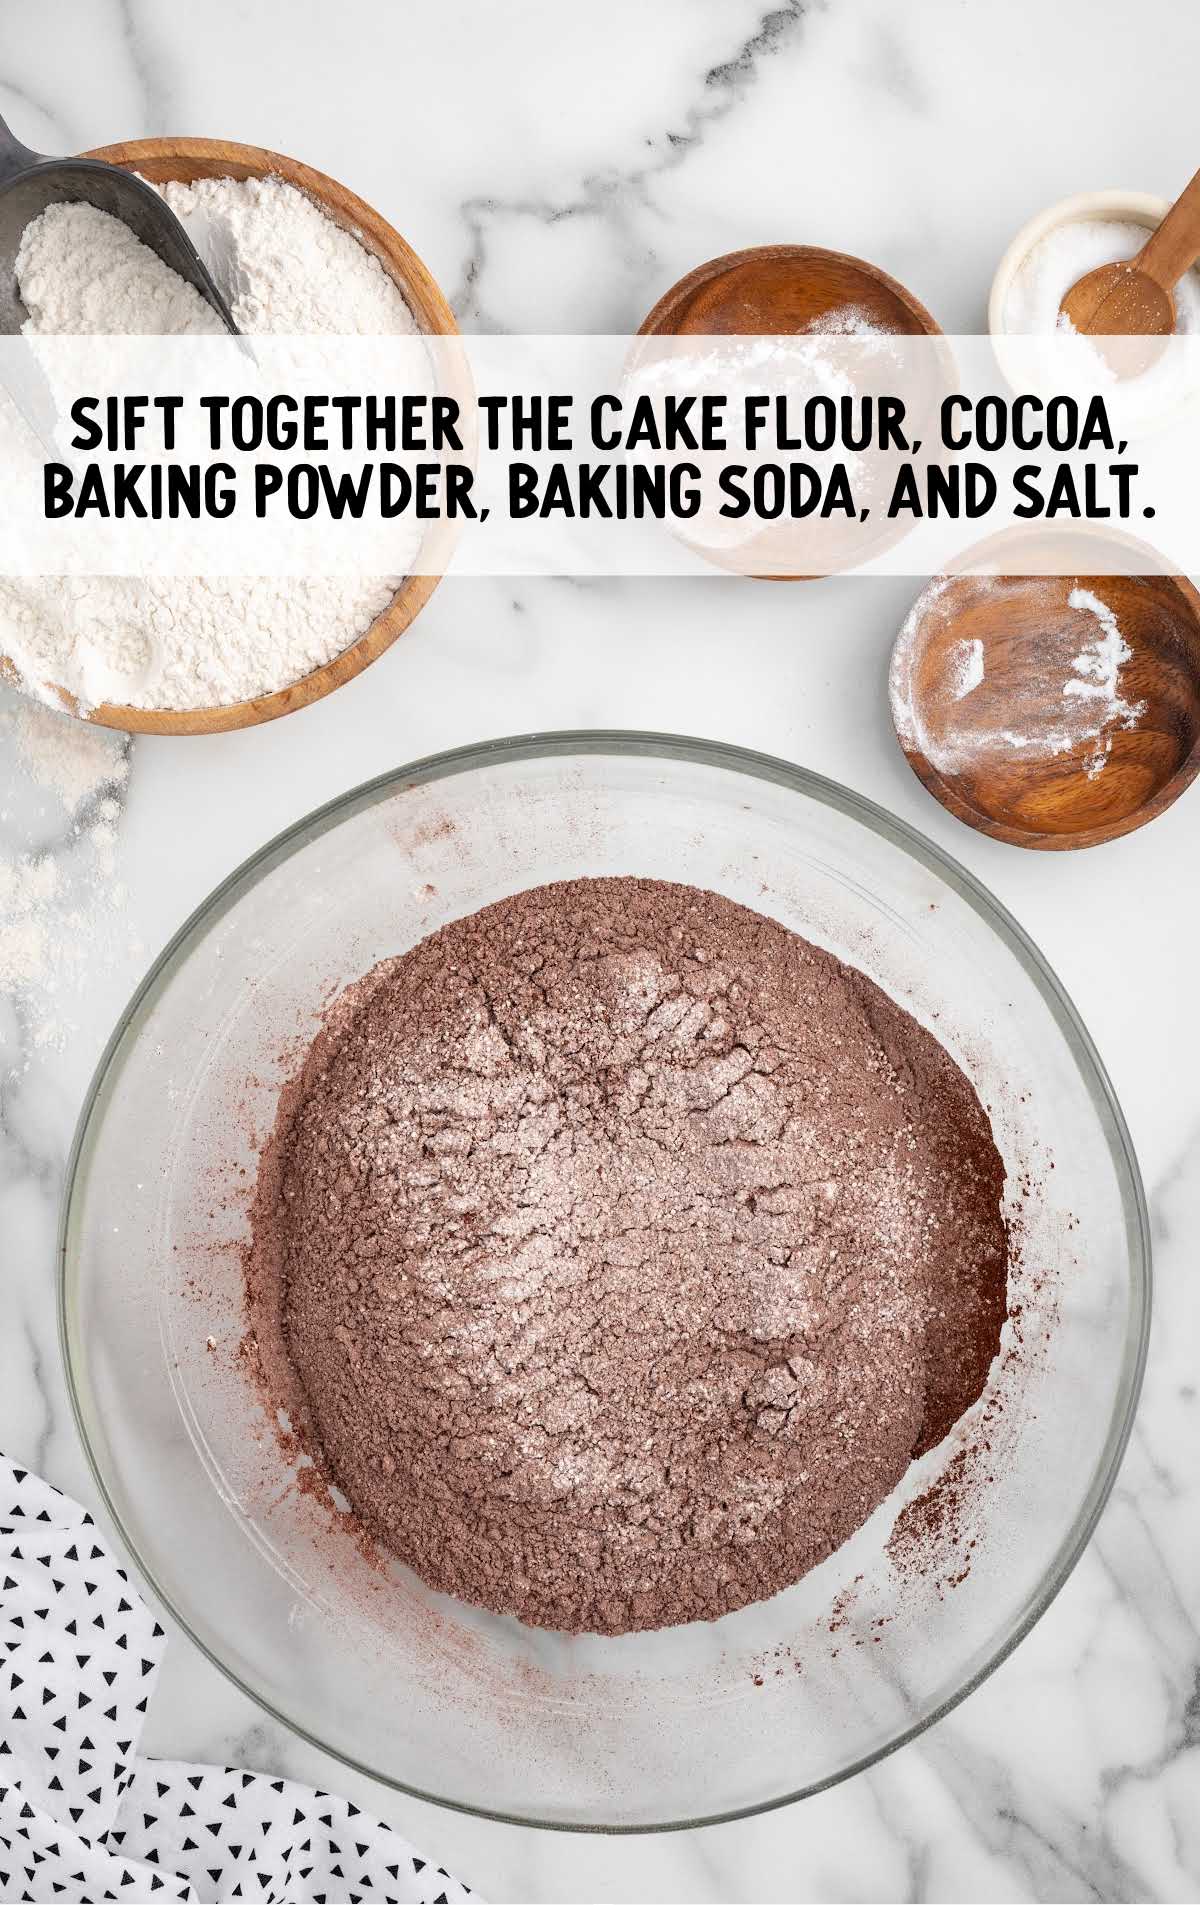 cake flour, unsweetened cocoa powder, baking powder, baking soda, and salt combined in a bowl